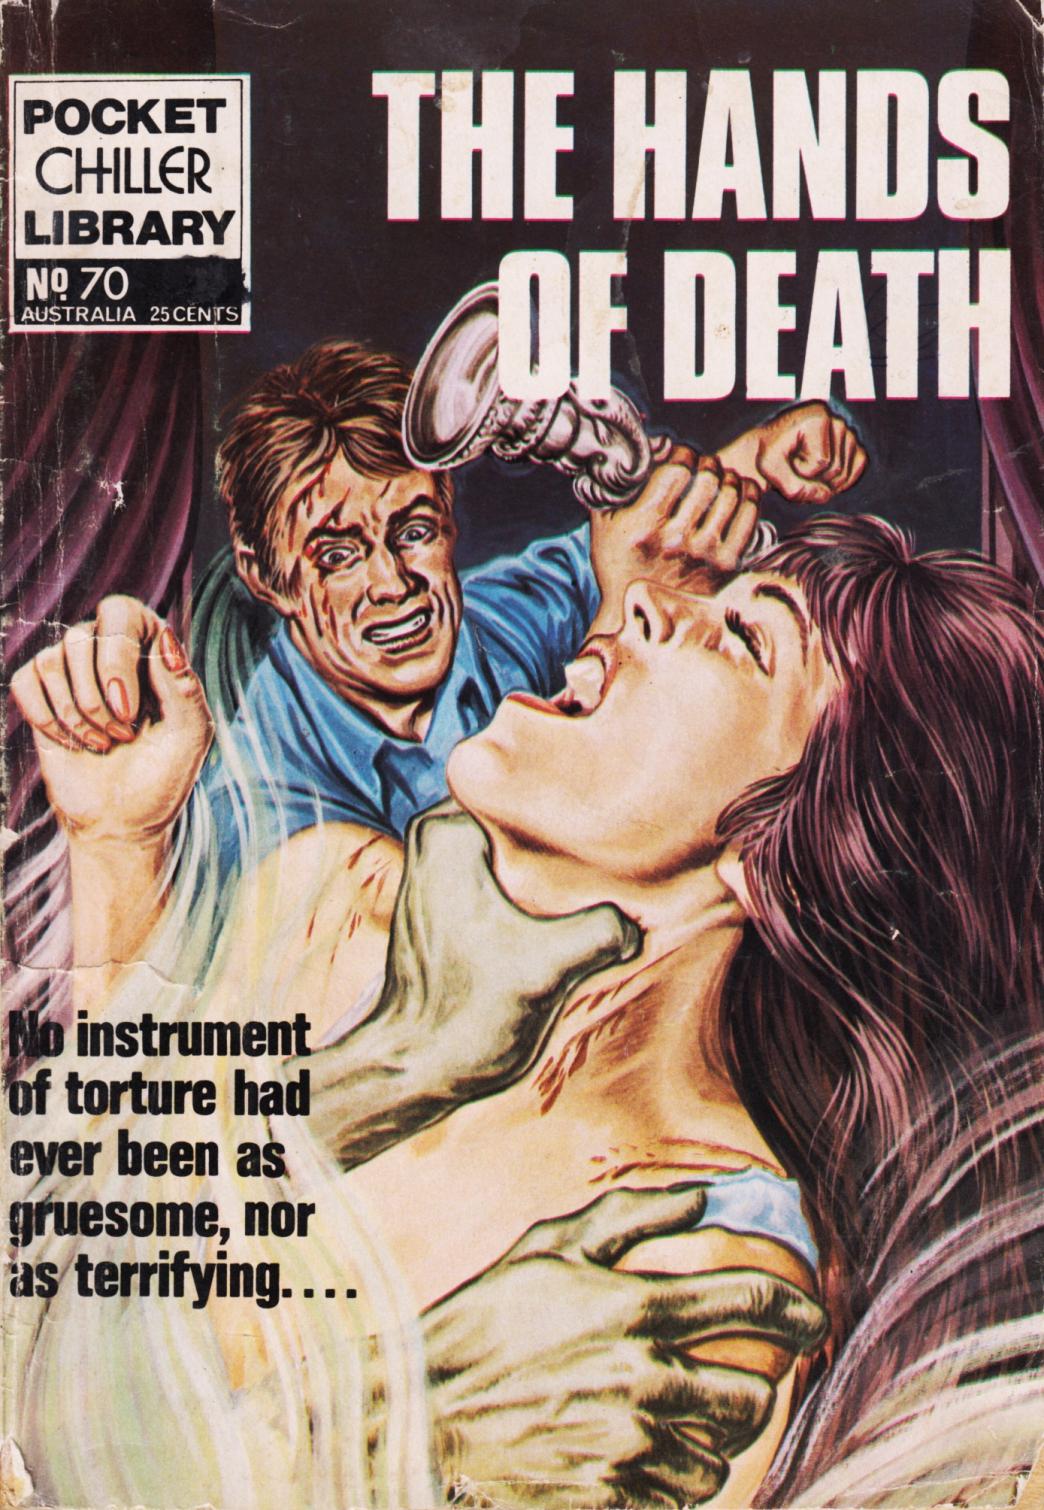 Pocket Chiller Library 70 - The Hands of Death